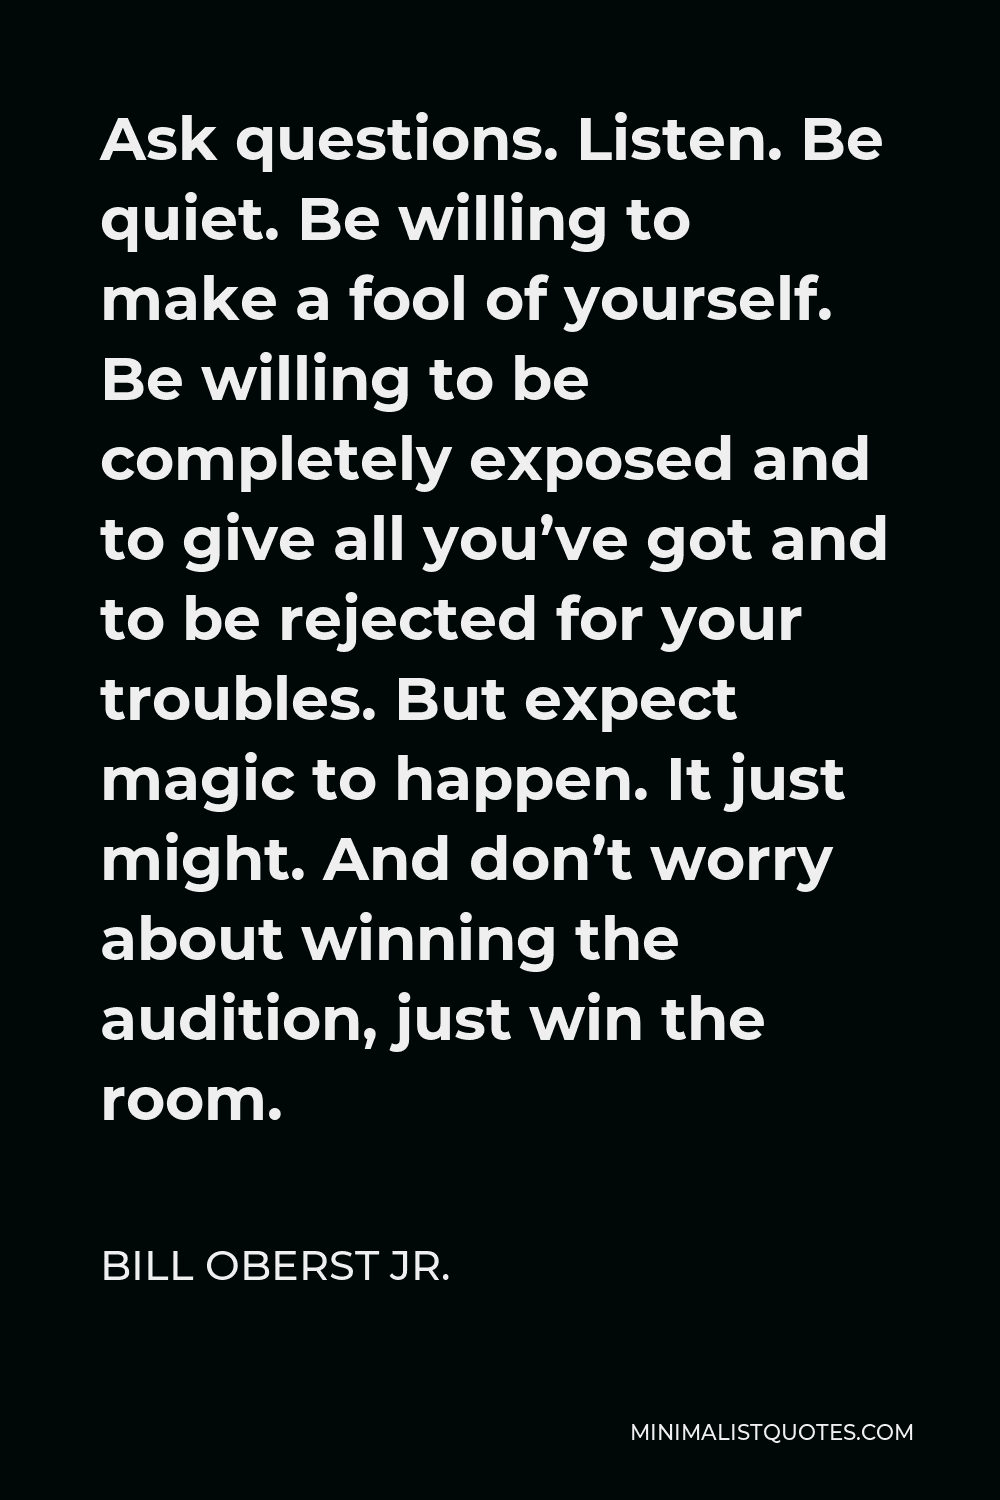 Bill Oberst Jr. Quote - Ask questions. Listen. Be quiet. Be willing to make a fool of yourself. Be willing to be completely exposed and to give all you’ve got and to be rejected for your troubles. But expect magic to happen. It just might. And don’t worry about winning the audition, just win the room.